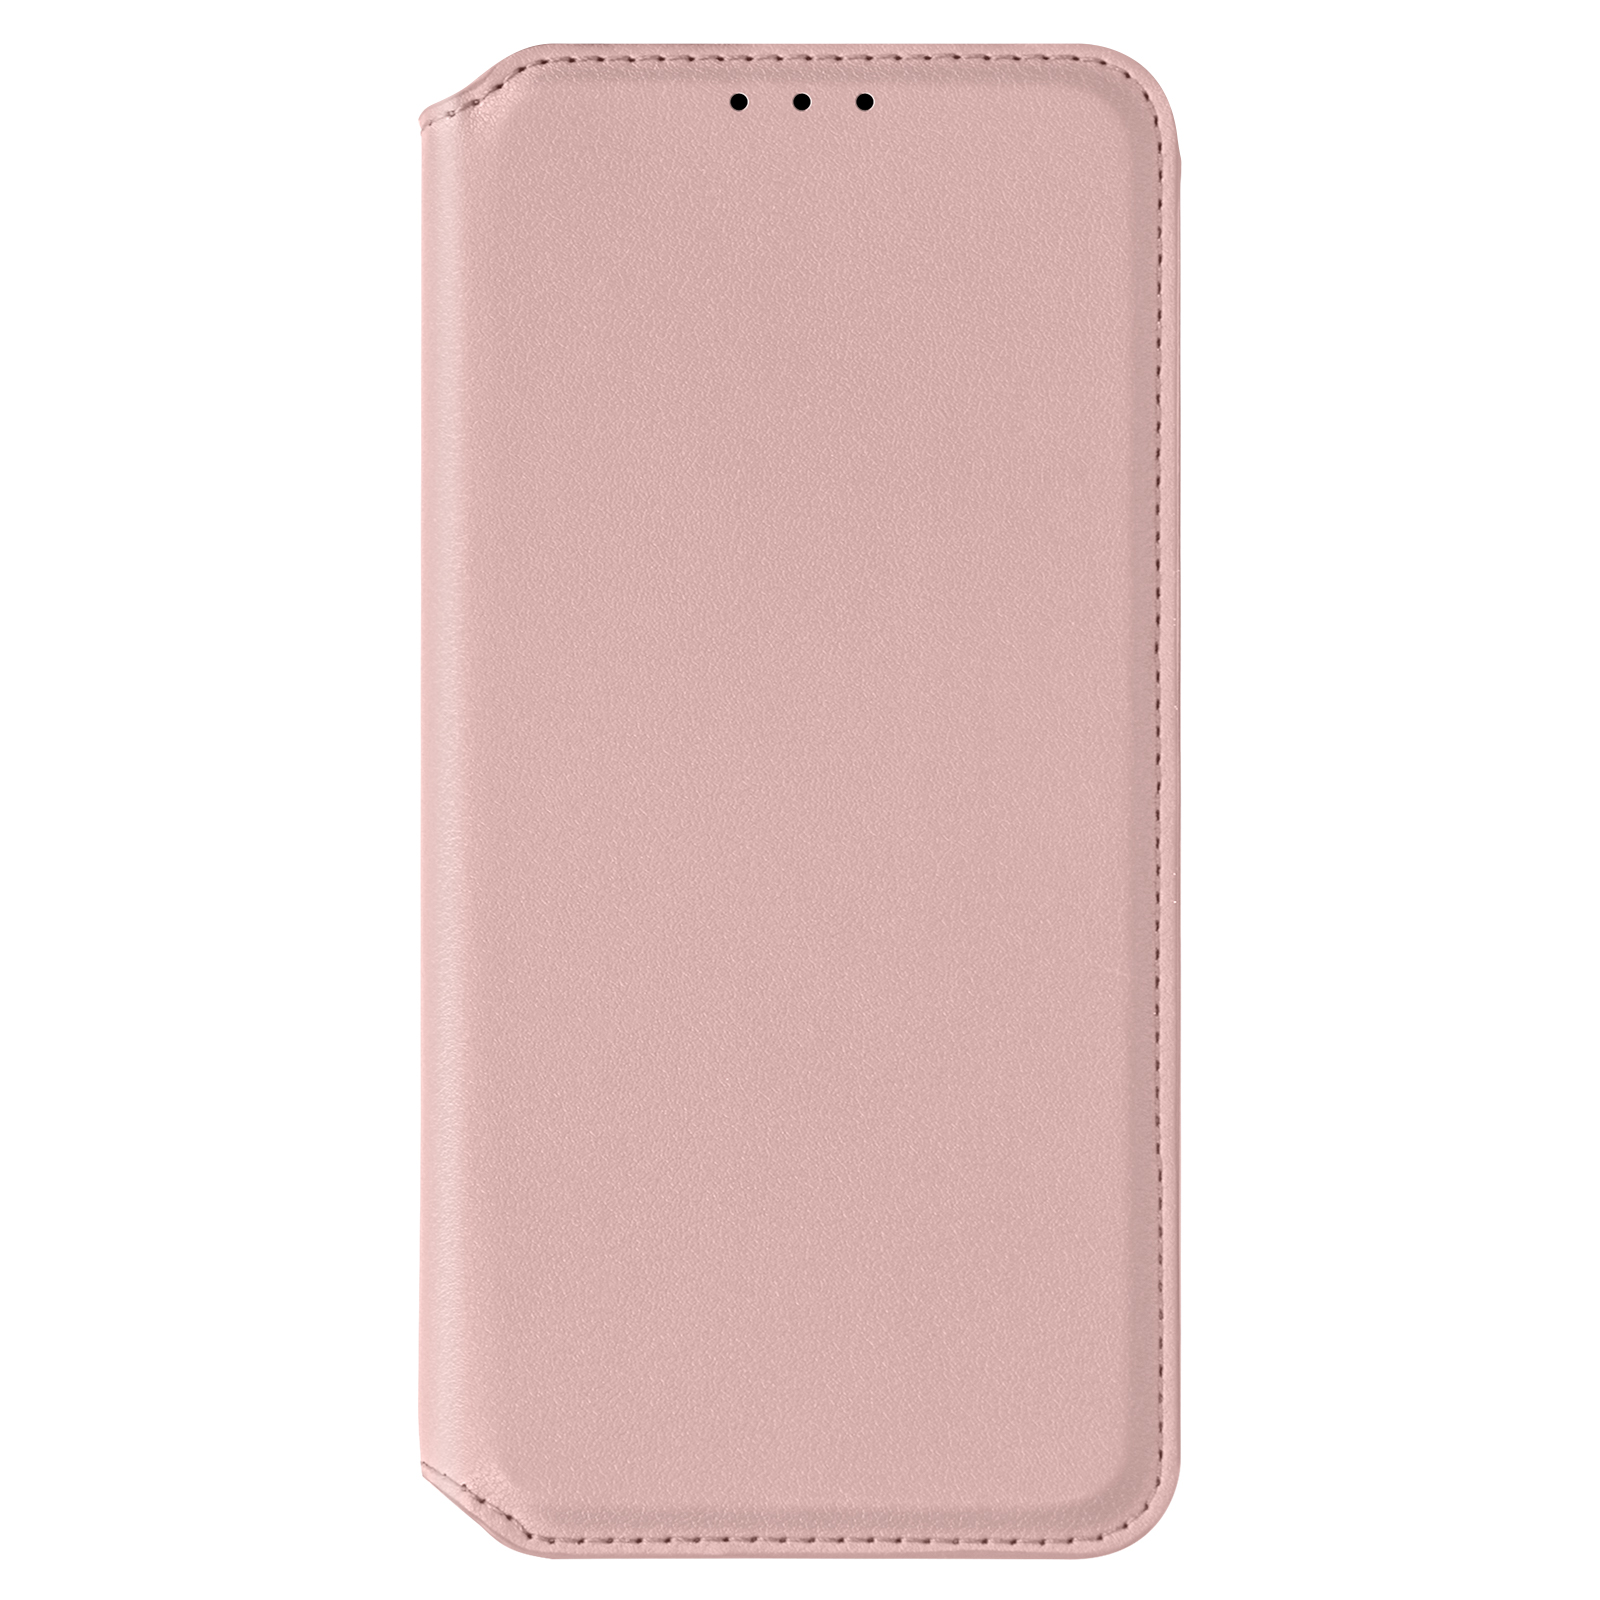 Series, AVIZAR Bookcover, Rosegold mit 7S, Honor, Magnetklappe Edition, Classic Honor Backcover